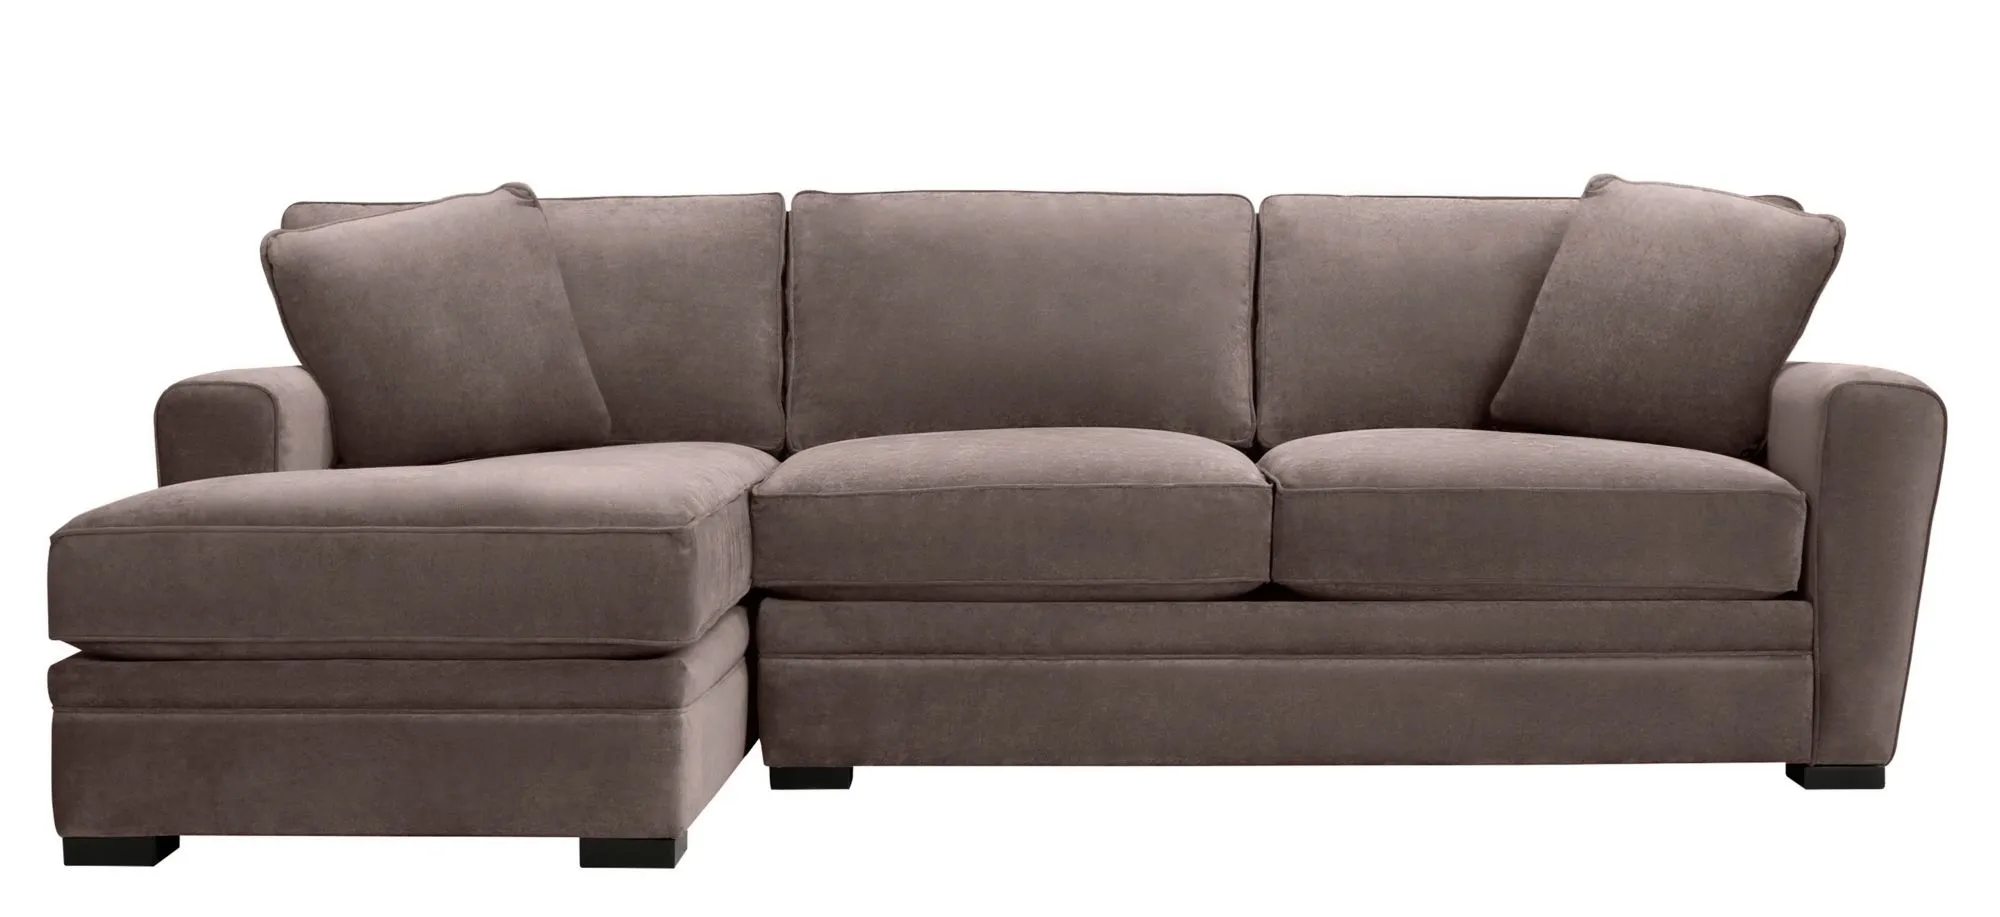 Artemis II 2-pc. Left Hand Facing Sectional Sofa in Gypsy Truffle by Jonathan Louis